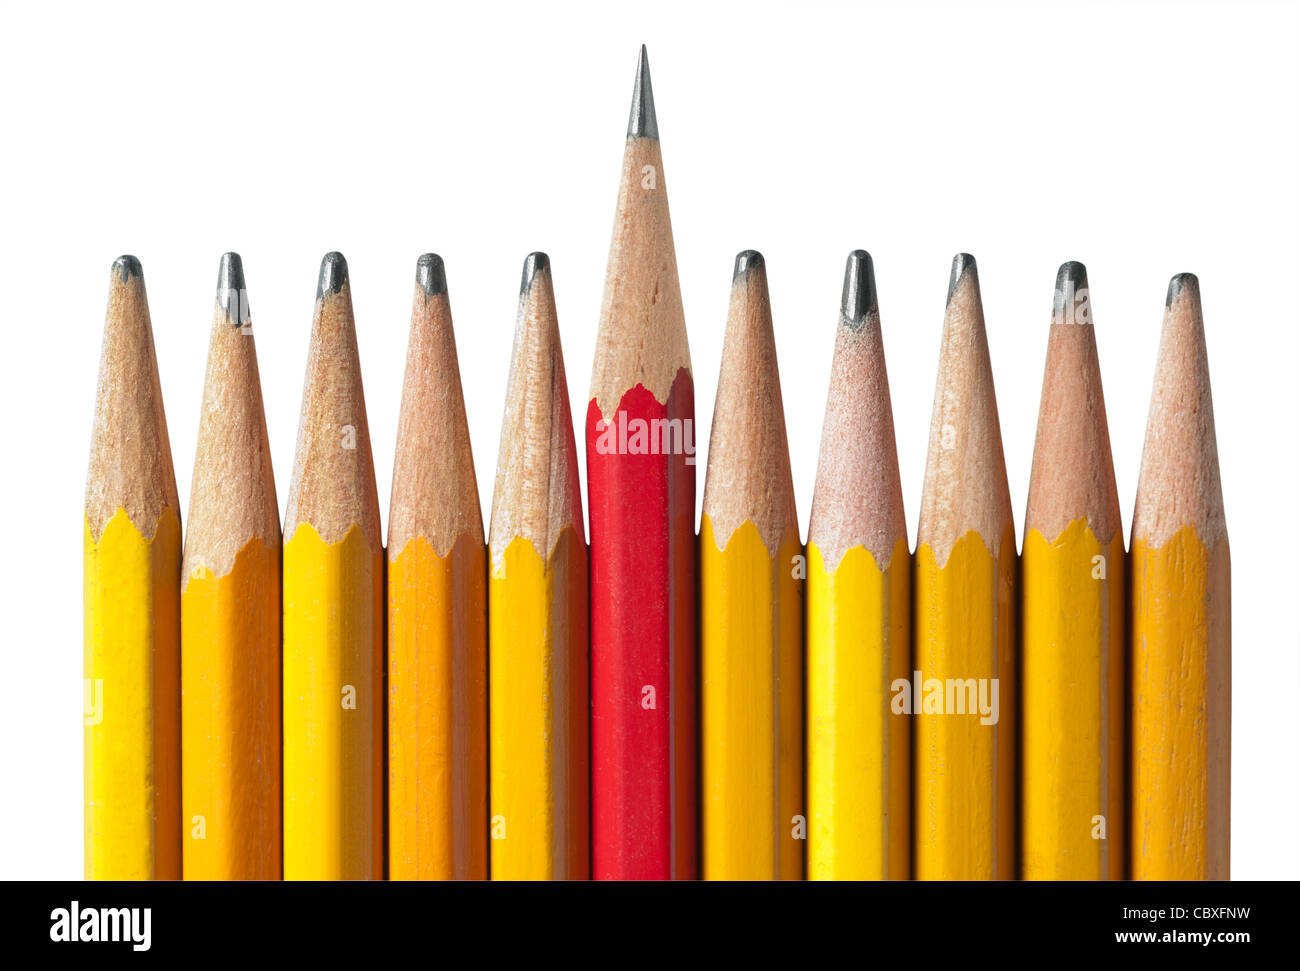 Sharpest pencil of the bunch: metaphor for leadership, intelligence, individuality, teamwork and unity. Stock Photo